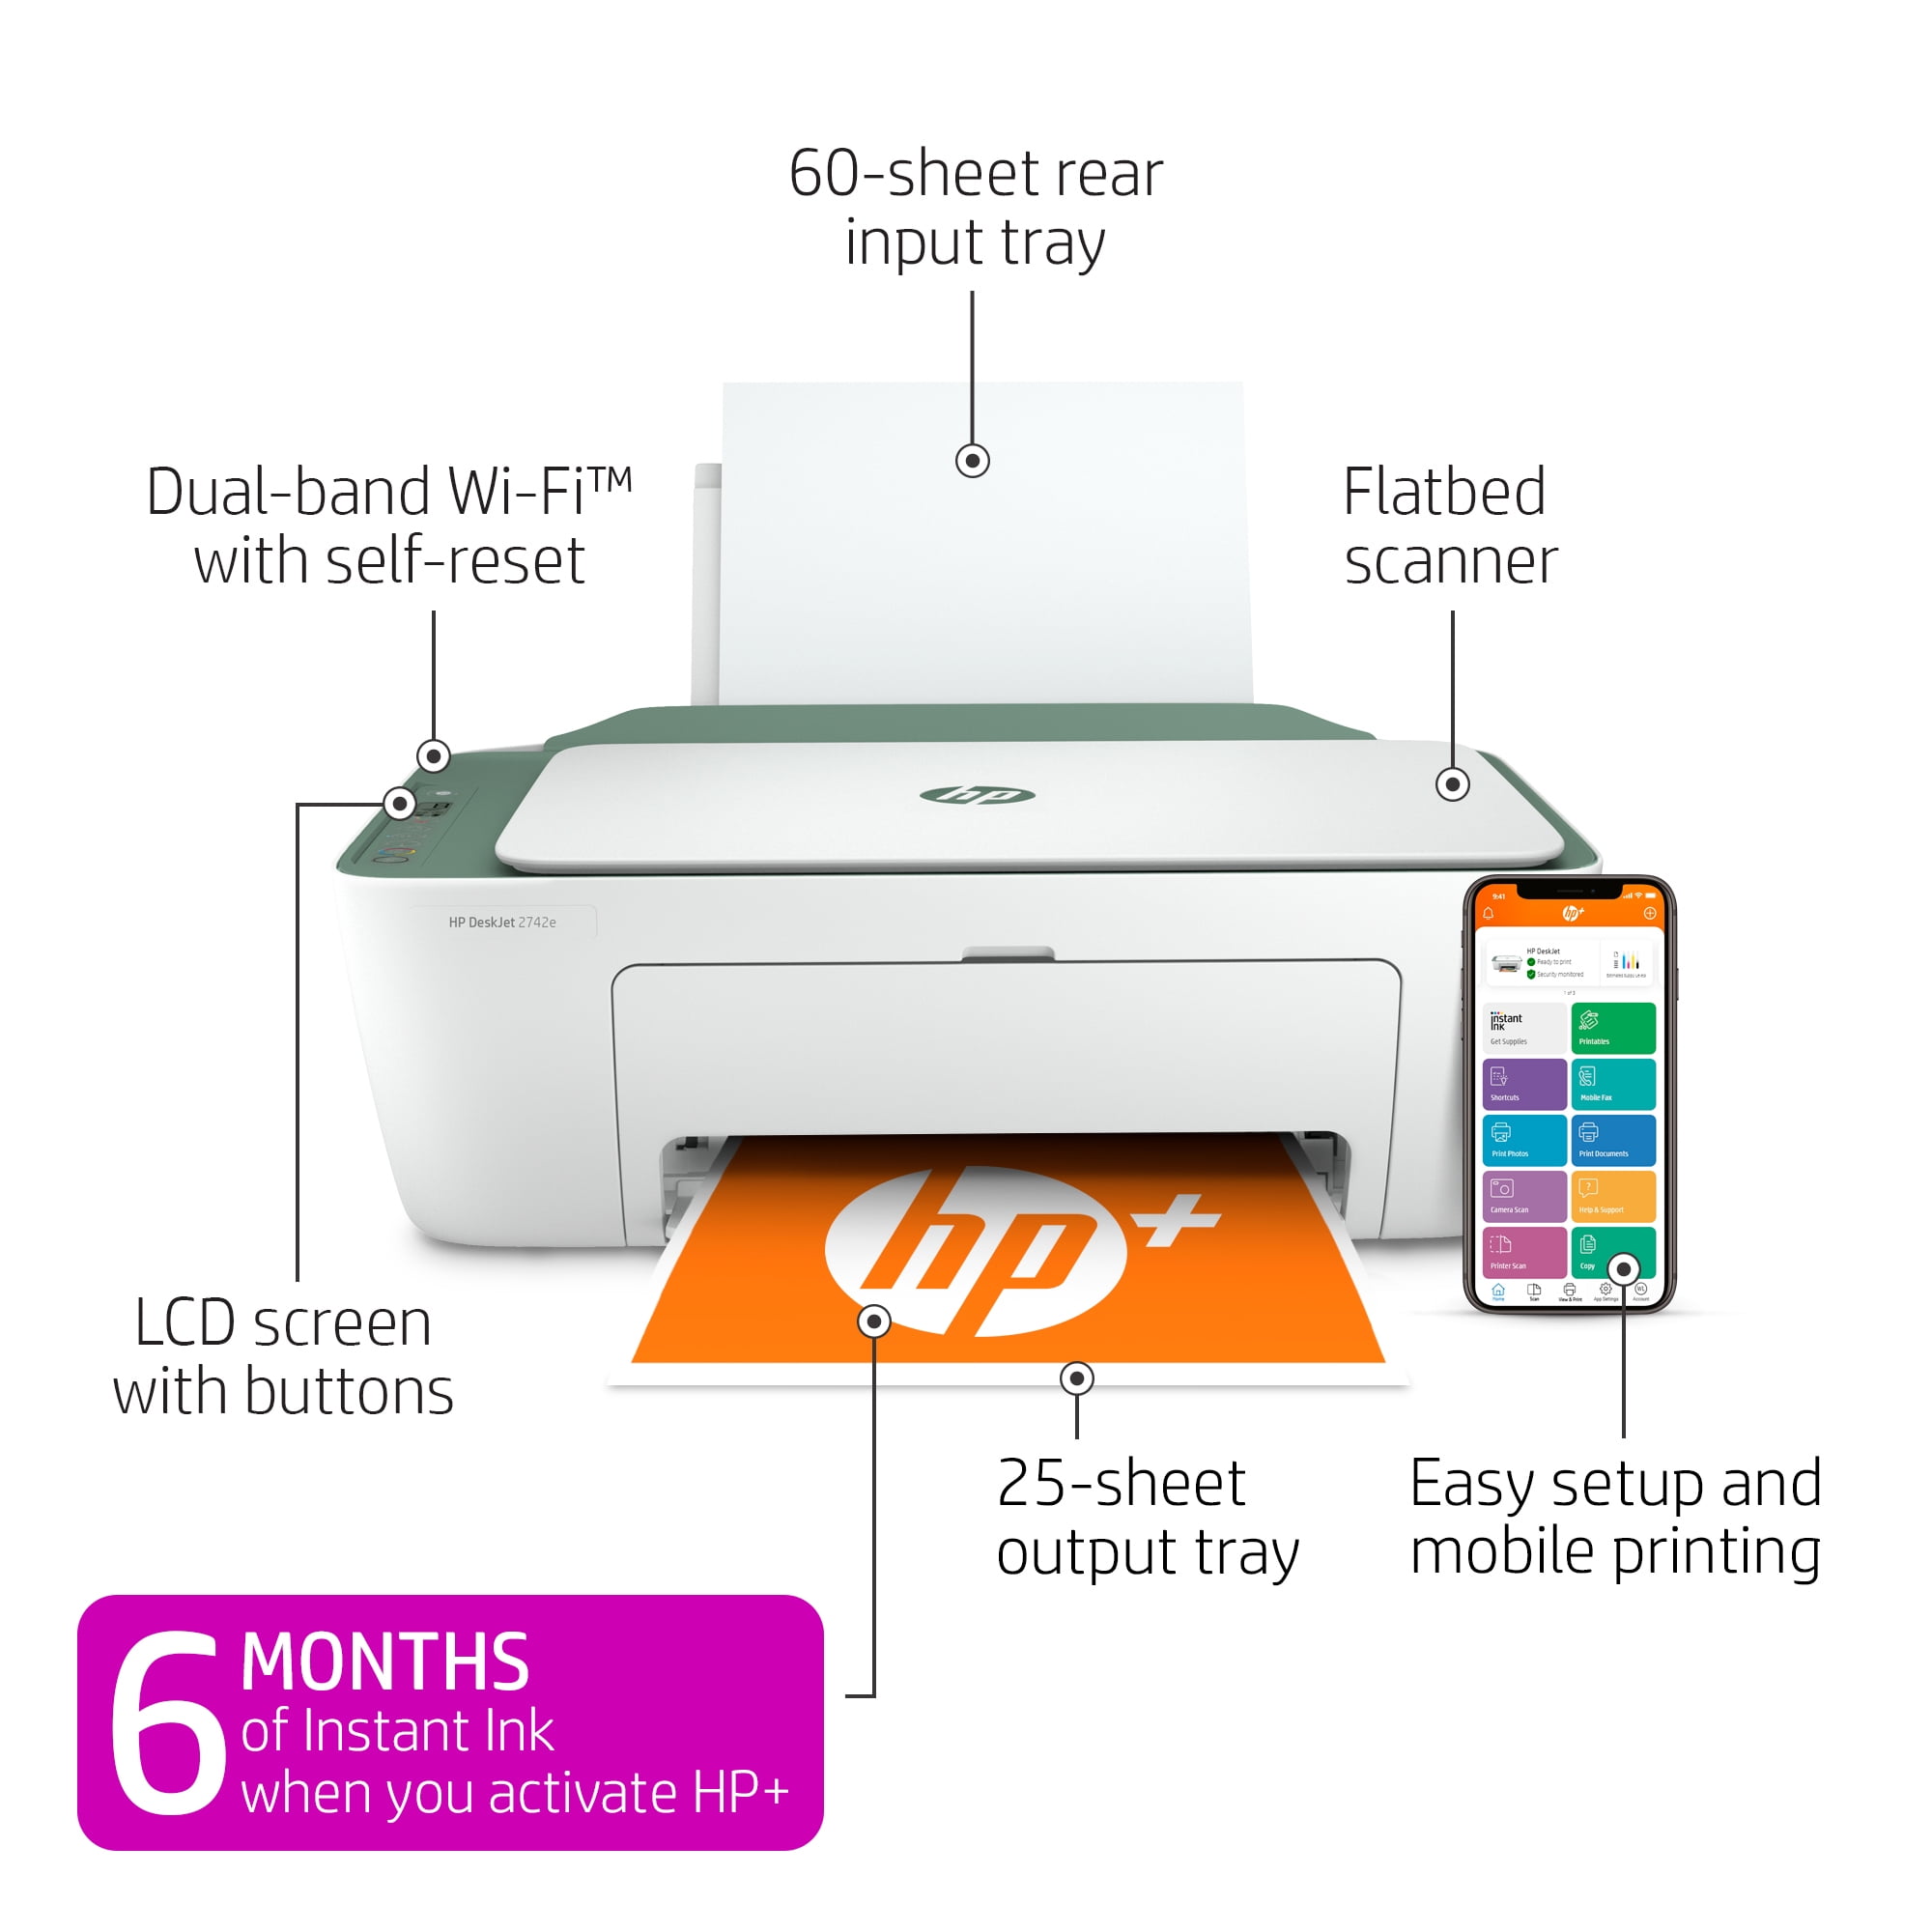 HP DeskJet 2742e Wireless Color All-in-One Inkjet Printer (Green Matcha) with 6 months Instant Ink Included with HP+ - 2